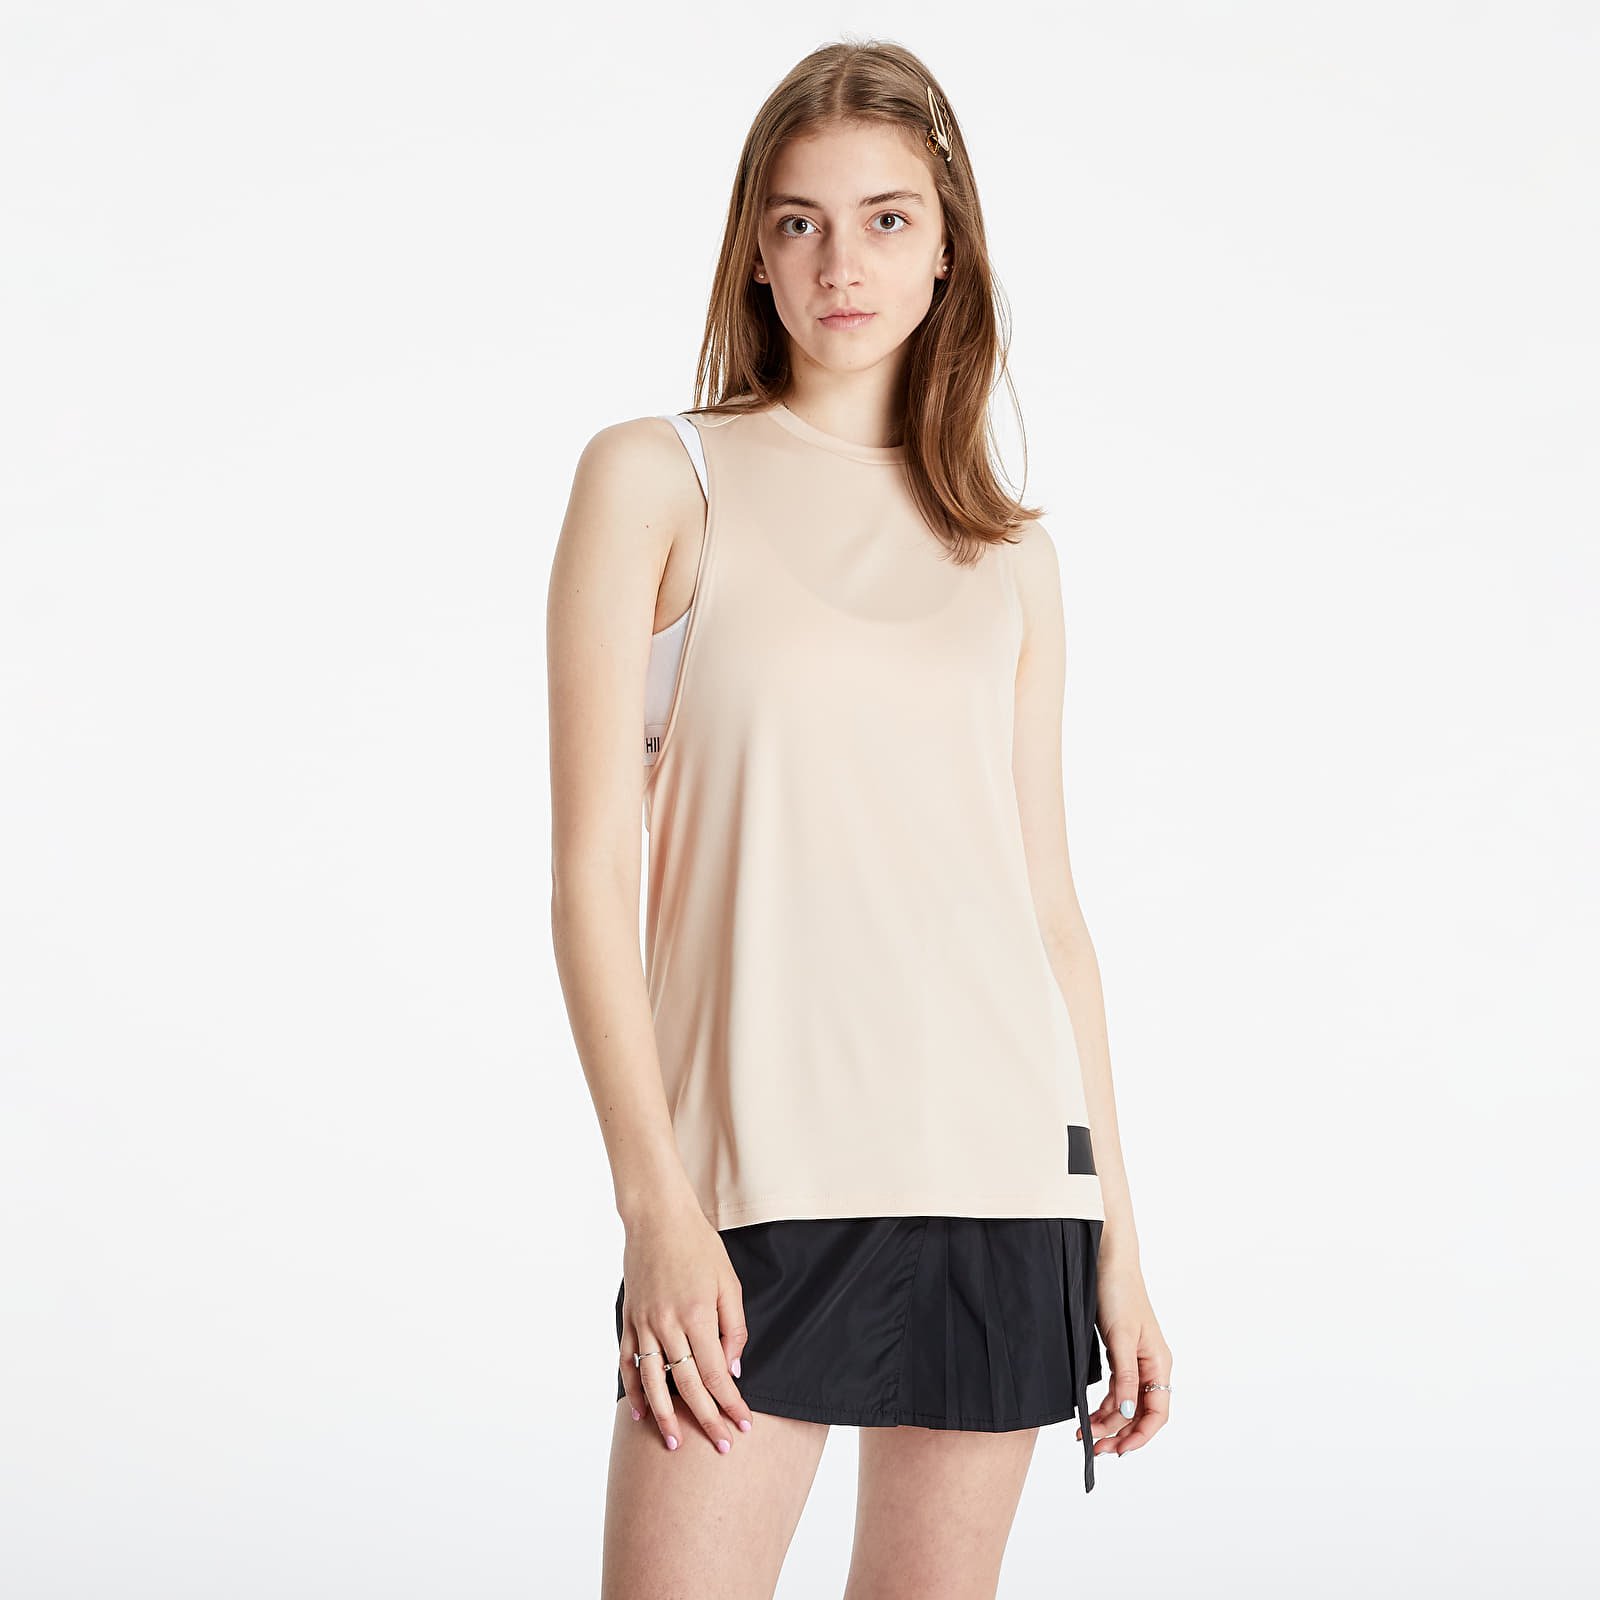 Tielka adidas Parley Mission Kit Run for the Oceans Tank Top Halo Blush